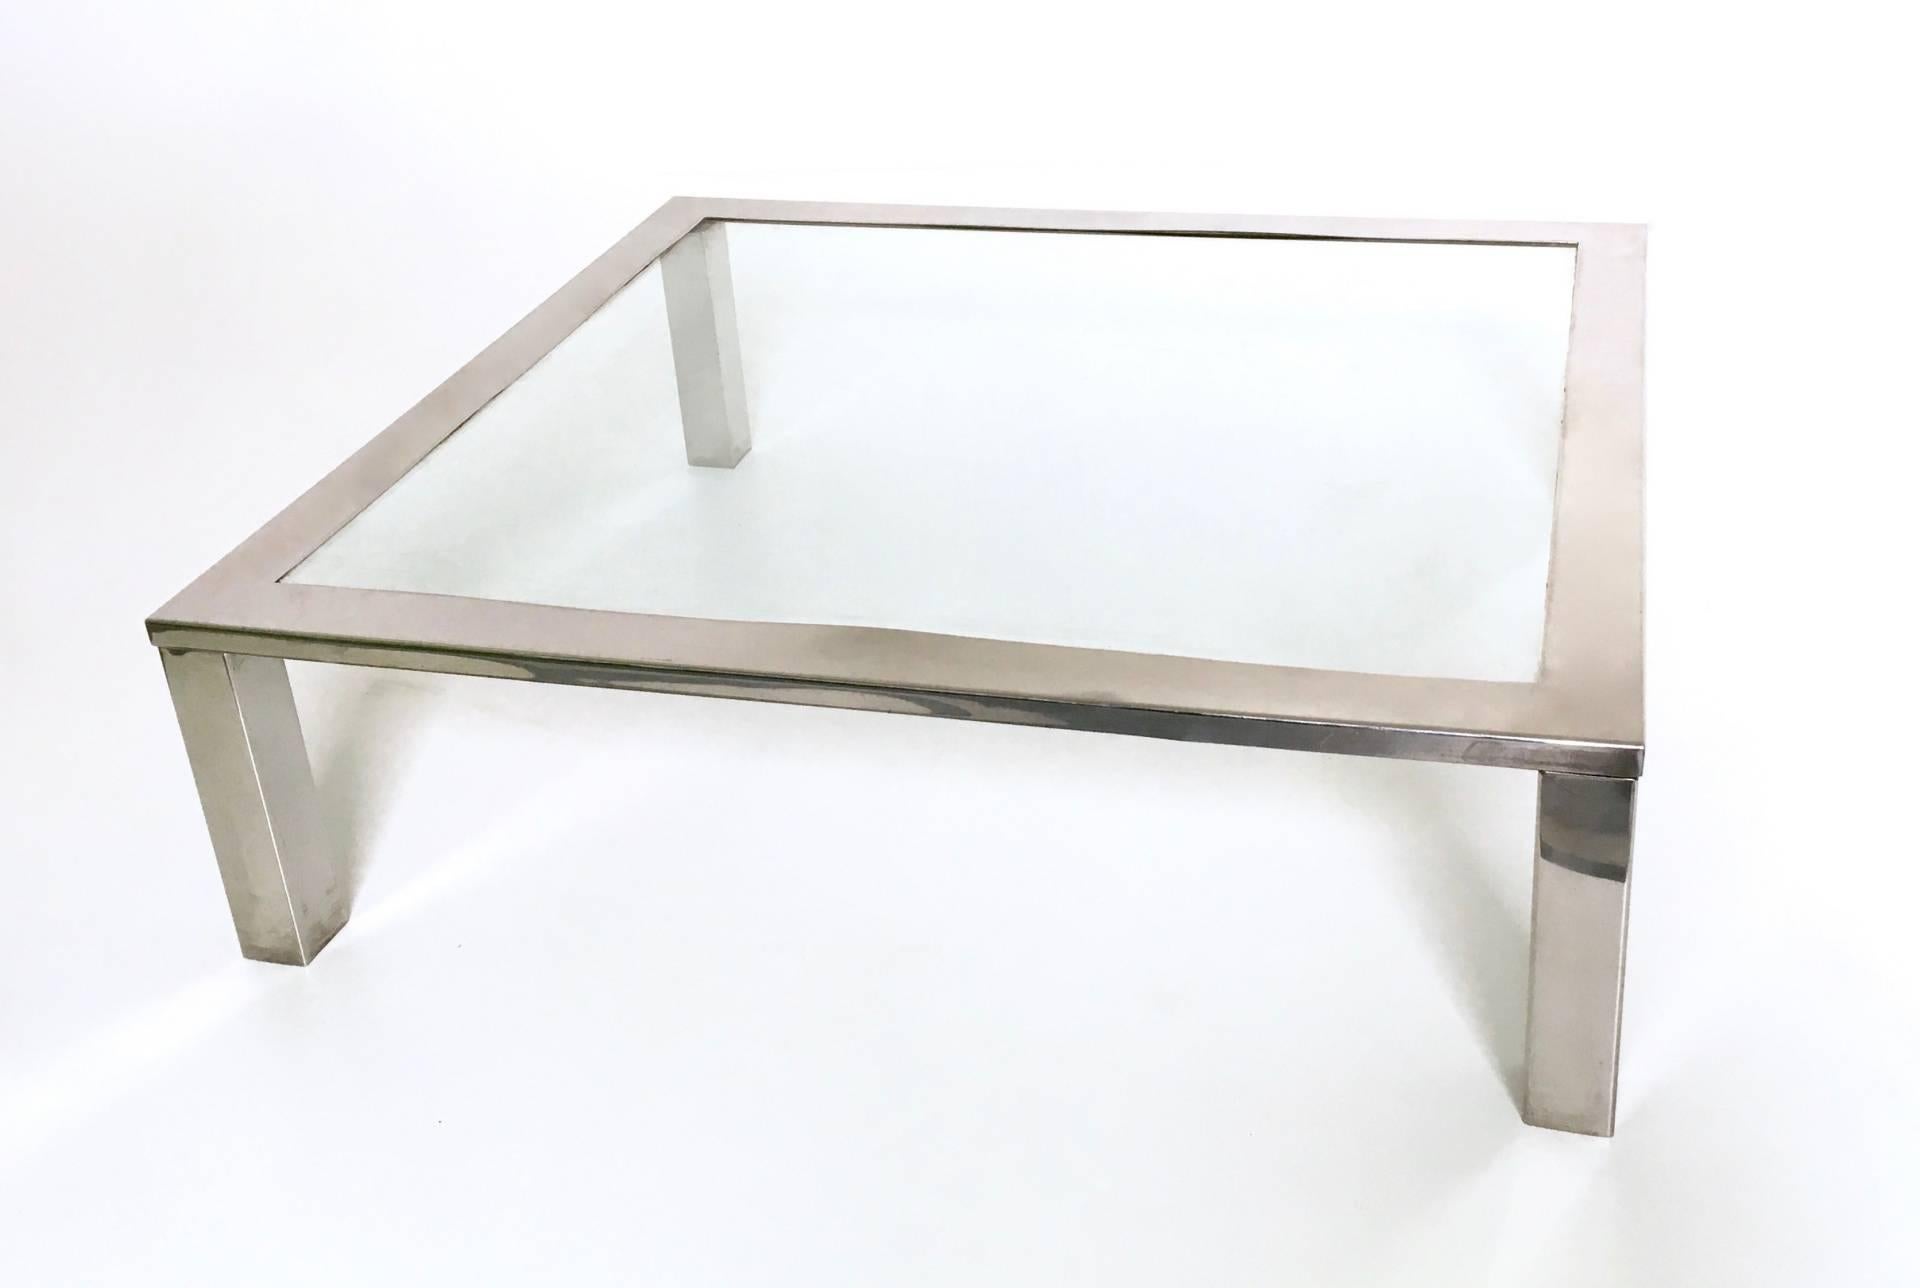 This coffee table features a chrome-plated metal frame and a glass top.
It might show slight traces of use since it's vintage, but it can be considered as in good / fair original condition.

Width: 120 cm 
Depth: 110 cm 
Height: 36 cm